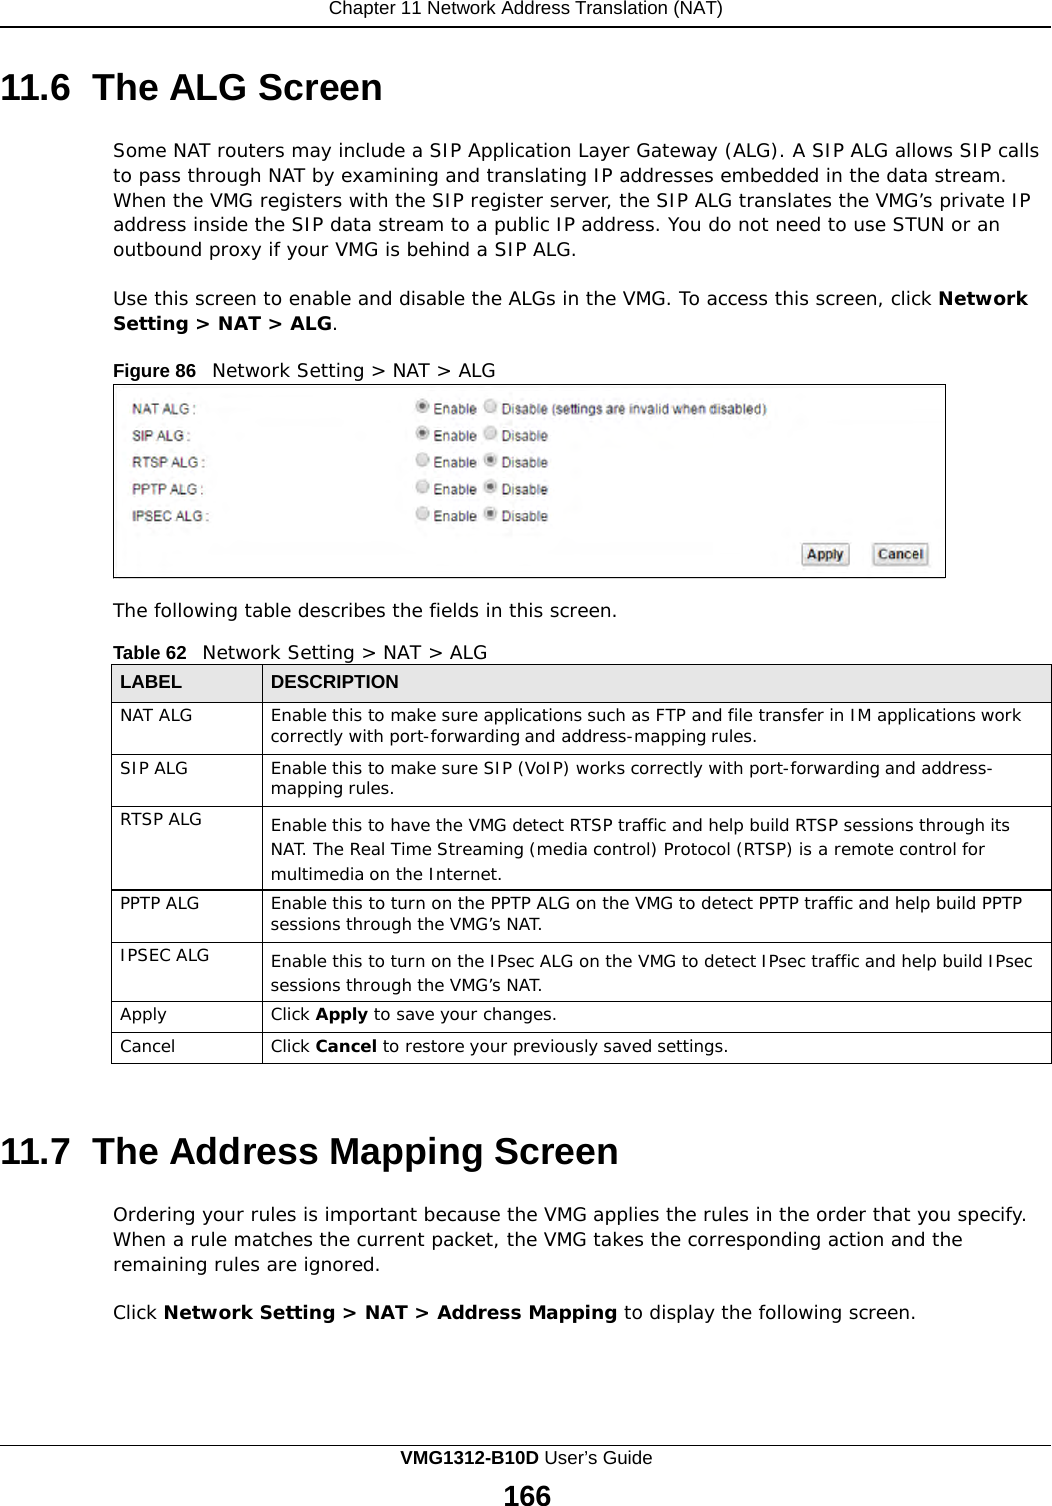 Chapter 11 Network Address Translation (NAT)      11.6  The ALG Screen  Some NAT routers may include a SIP Application Layer Gateway (ALG). A SIP ALG allows SIP calls to pass through NAT by examining and translating IP addresses embedded in the data stream. When the VMG registers with the SIP register server, the SIP ALG translates the VMG’s private IP address inside the SIP data stream to a public IP address. You do not need to use STUN or an outbound proxy if your VMG is behind a SIP ALG.  Use this screen to enable and disable the ALGs in the VMG. To access this screen, click Network Setting &gt; NAT &gt; ALG.  Figure 86   Network Setting &gt; NAT &gt; ALG           The following table describes the fields in this screen.  Table 62   Network Setting &gt; NAT &gt; ALG  LABEL DESCRIPTION NAT ALG Enable this to make sure applications such as FTP and file transfer in IM applications work correctly with port-forwarding and address-mapping rules. SIP ALG Enable this to make sure SIP (VoIP) works correctly with port-forwarding and address- mapping rules. RTSP ALG Enable this to have the VMG detect RTSP traffic and help build RTSP sessions through its NAT. The Real Time Streaming (media control) Protocol (RTSP) is a remote control for multimedia on the Internet. PPTP ALG Enable this to turn on the PPTP ALG on the VMG to detect PPTP traffic and help build PPTP sessions through the VMG’s NAT. IPSEC ALG Enable this to turn on the IPsec ALG on the VMG to detect IPsec traffic and help build IPsec sessions through the VMG’s NAT. Apply Click Apply to save your changes. Cancel Click Cancel to restore your previously saved settings.    11.7  The Address Mapping Screen  Ordering your rules is important because the VMG applies the rules in the order that you specify. When a rule matches the current packet, the VMG takes the corresponding action and the remaining rules are ignored.  Click Network Setting &gt; NAT &gt; Address Mapping to display the following screen. VMG1312-B10D User’s Guide 166  